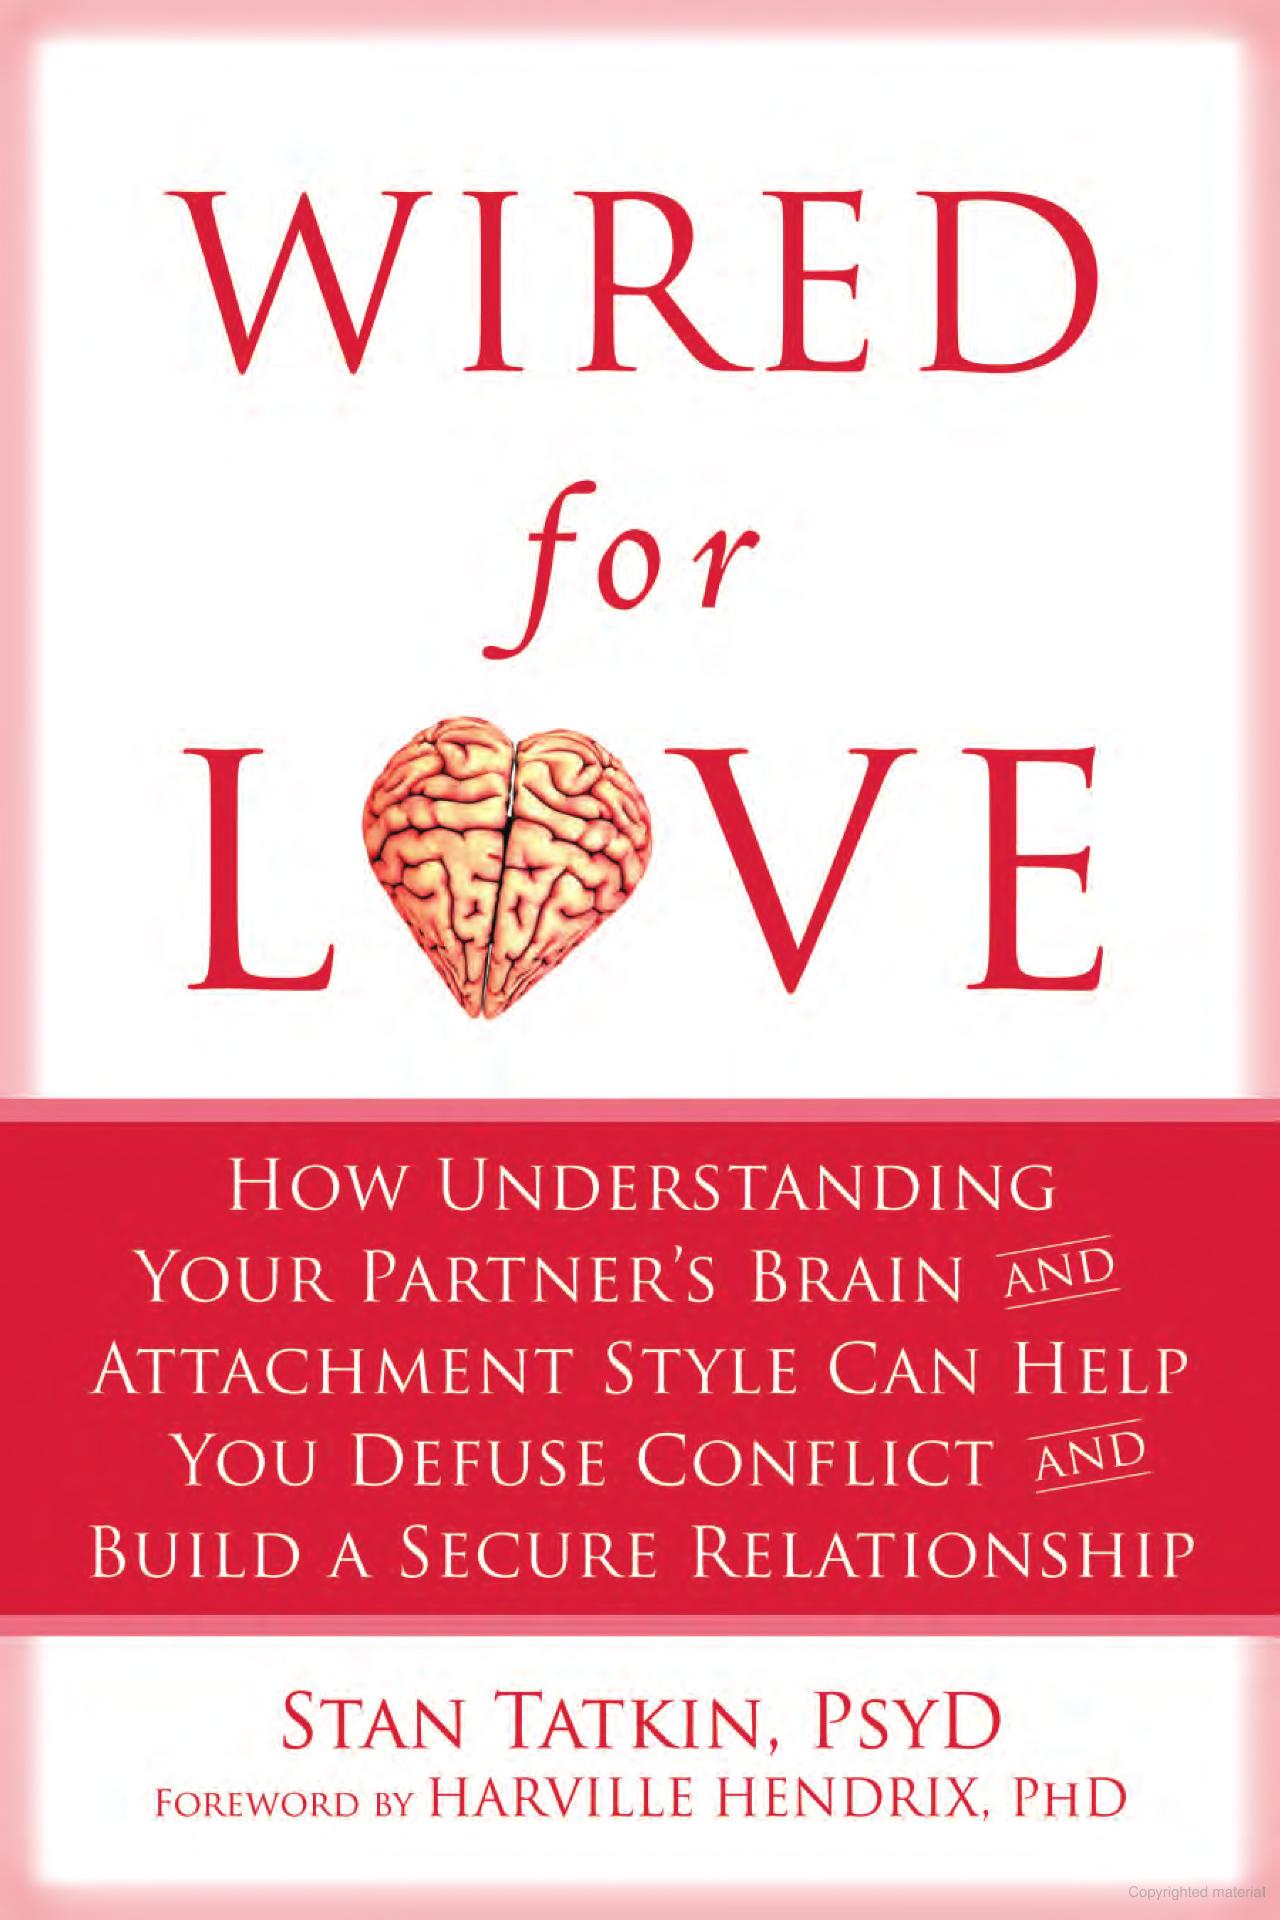 Wired for Love, by Stan Tatkin